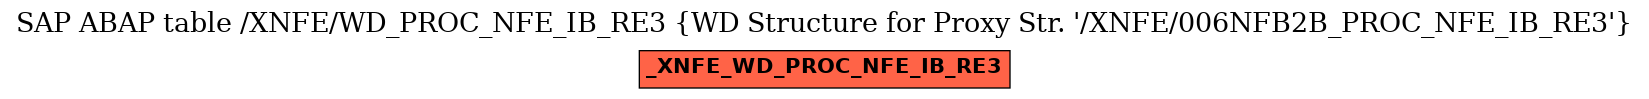 E-R Diagram for table /XNFE/WD_PROC_NFE_IB_RE3 (WD Structure for Proxy Str. 